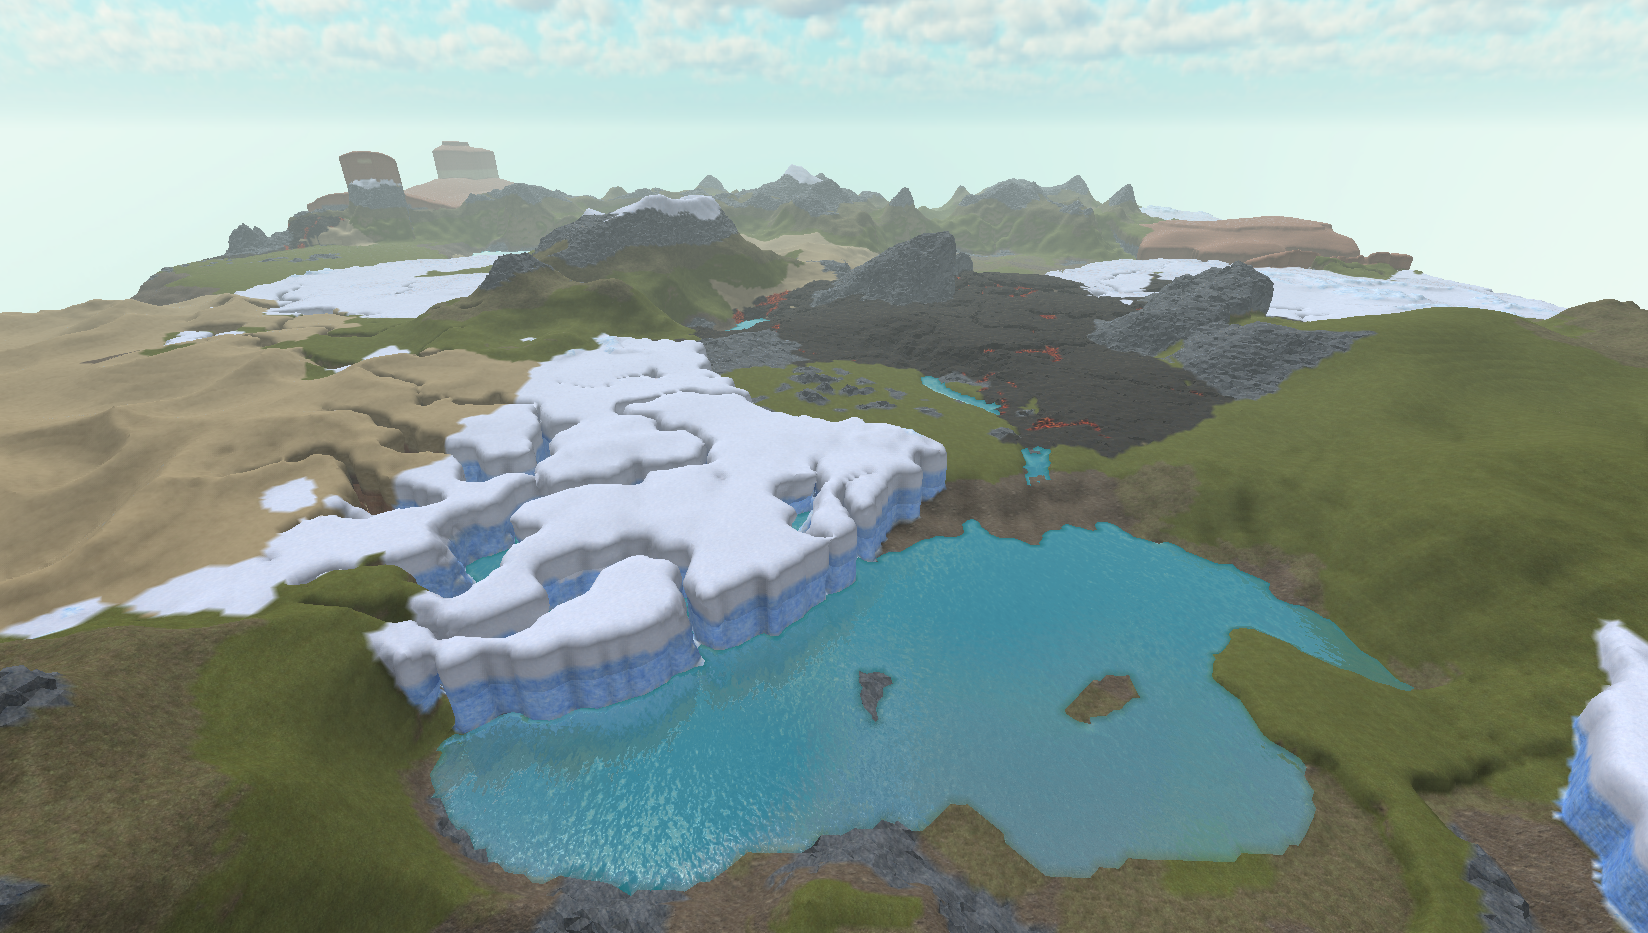 Smooth Terrain And New Horizons Roblox Blog